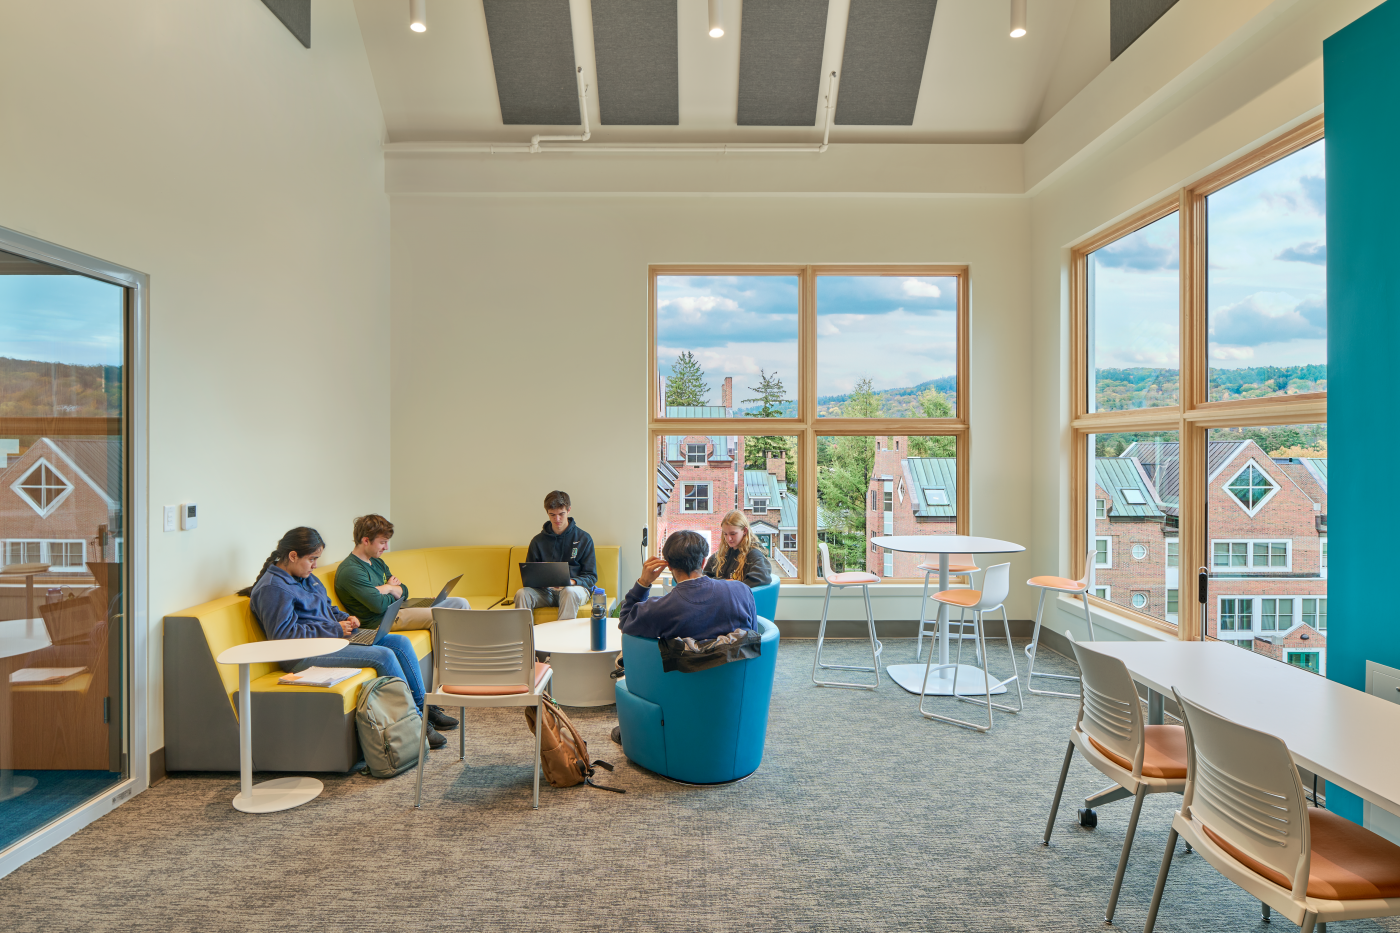 Dartmouth College Andres Hall Achieves USGBC LEED Gold